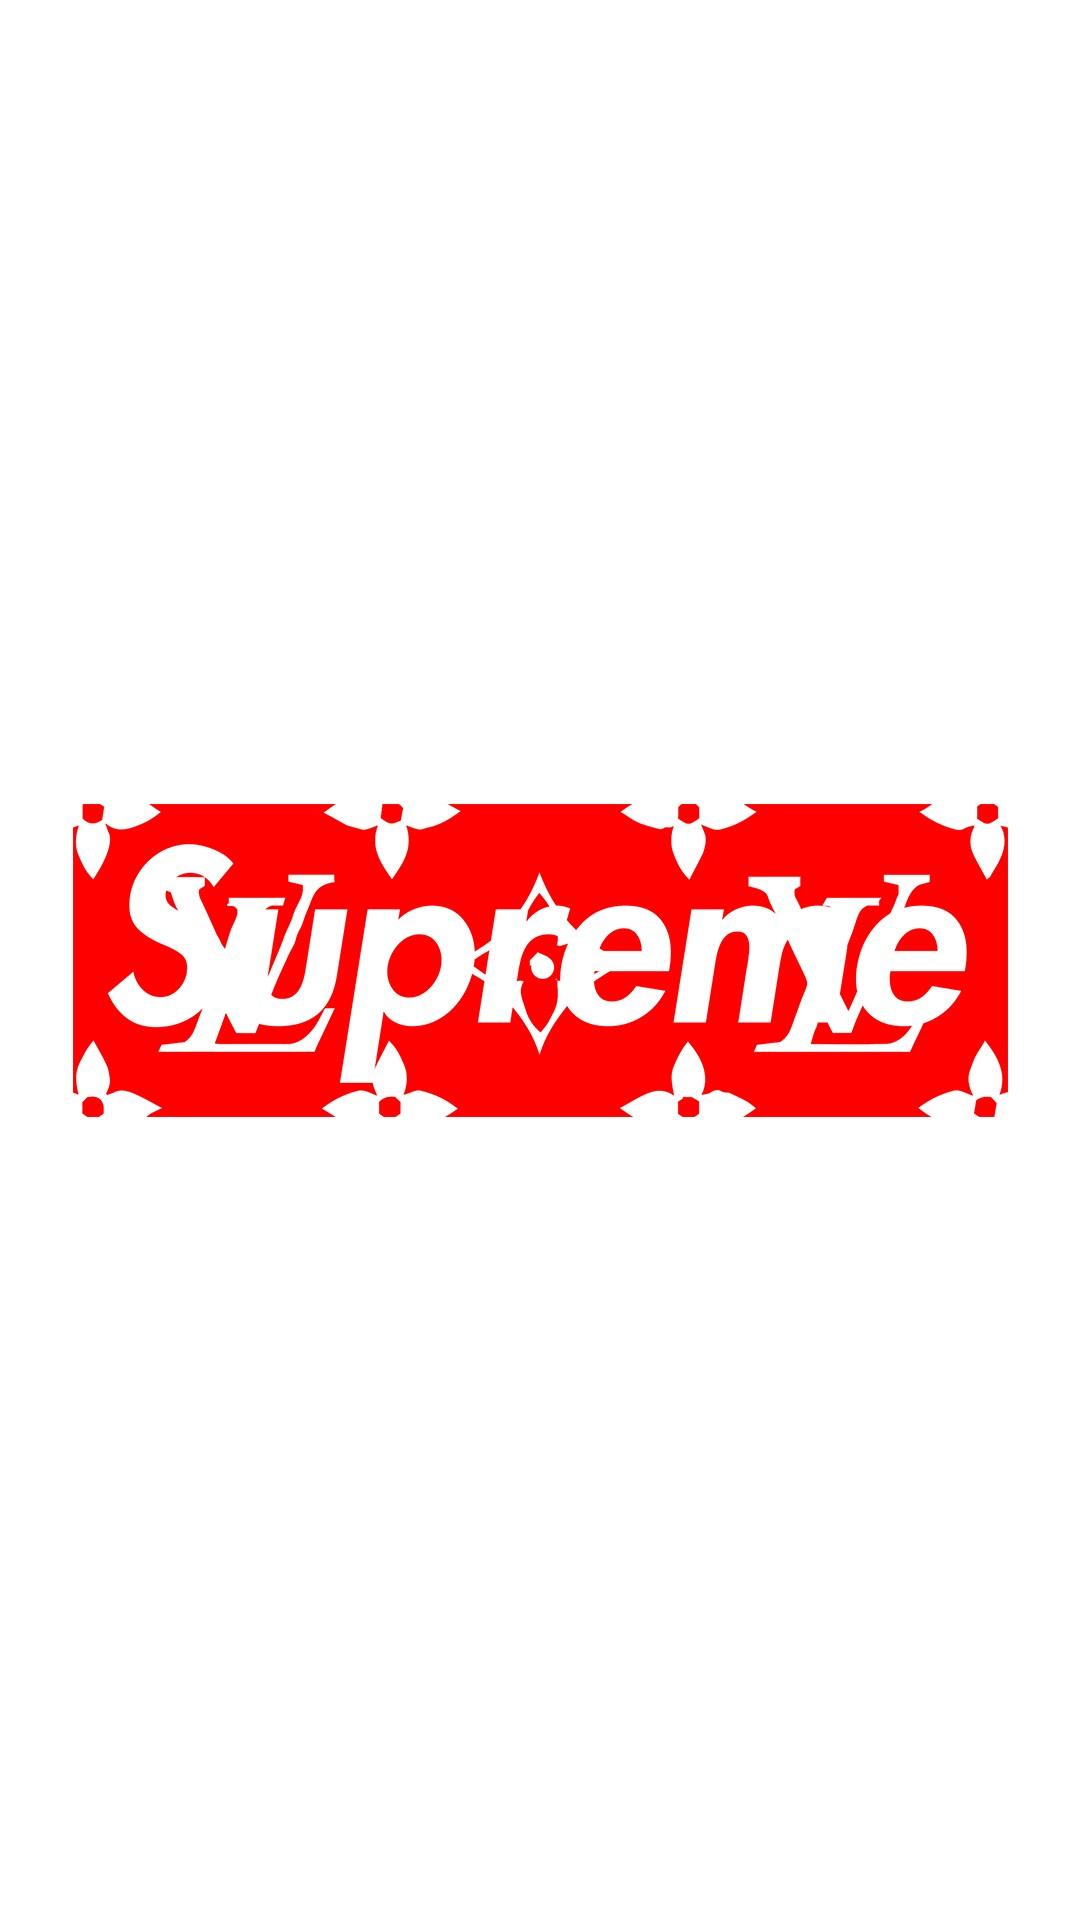 Supreme wall paper Gallery